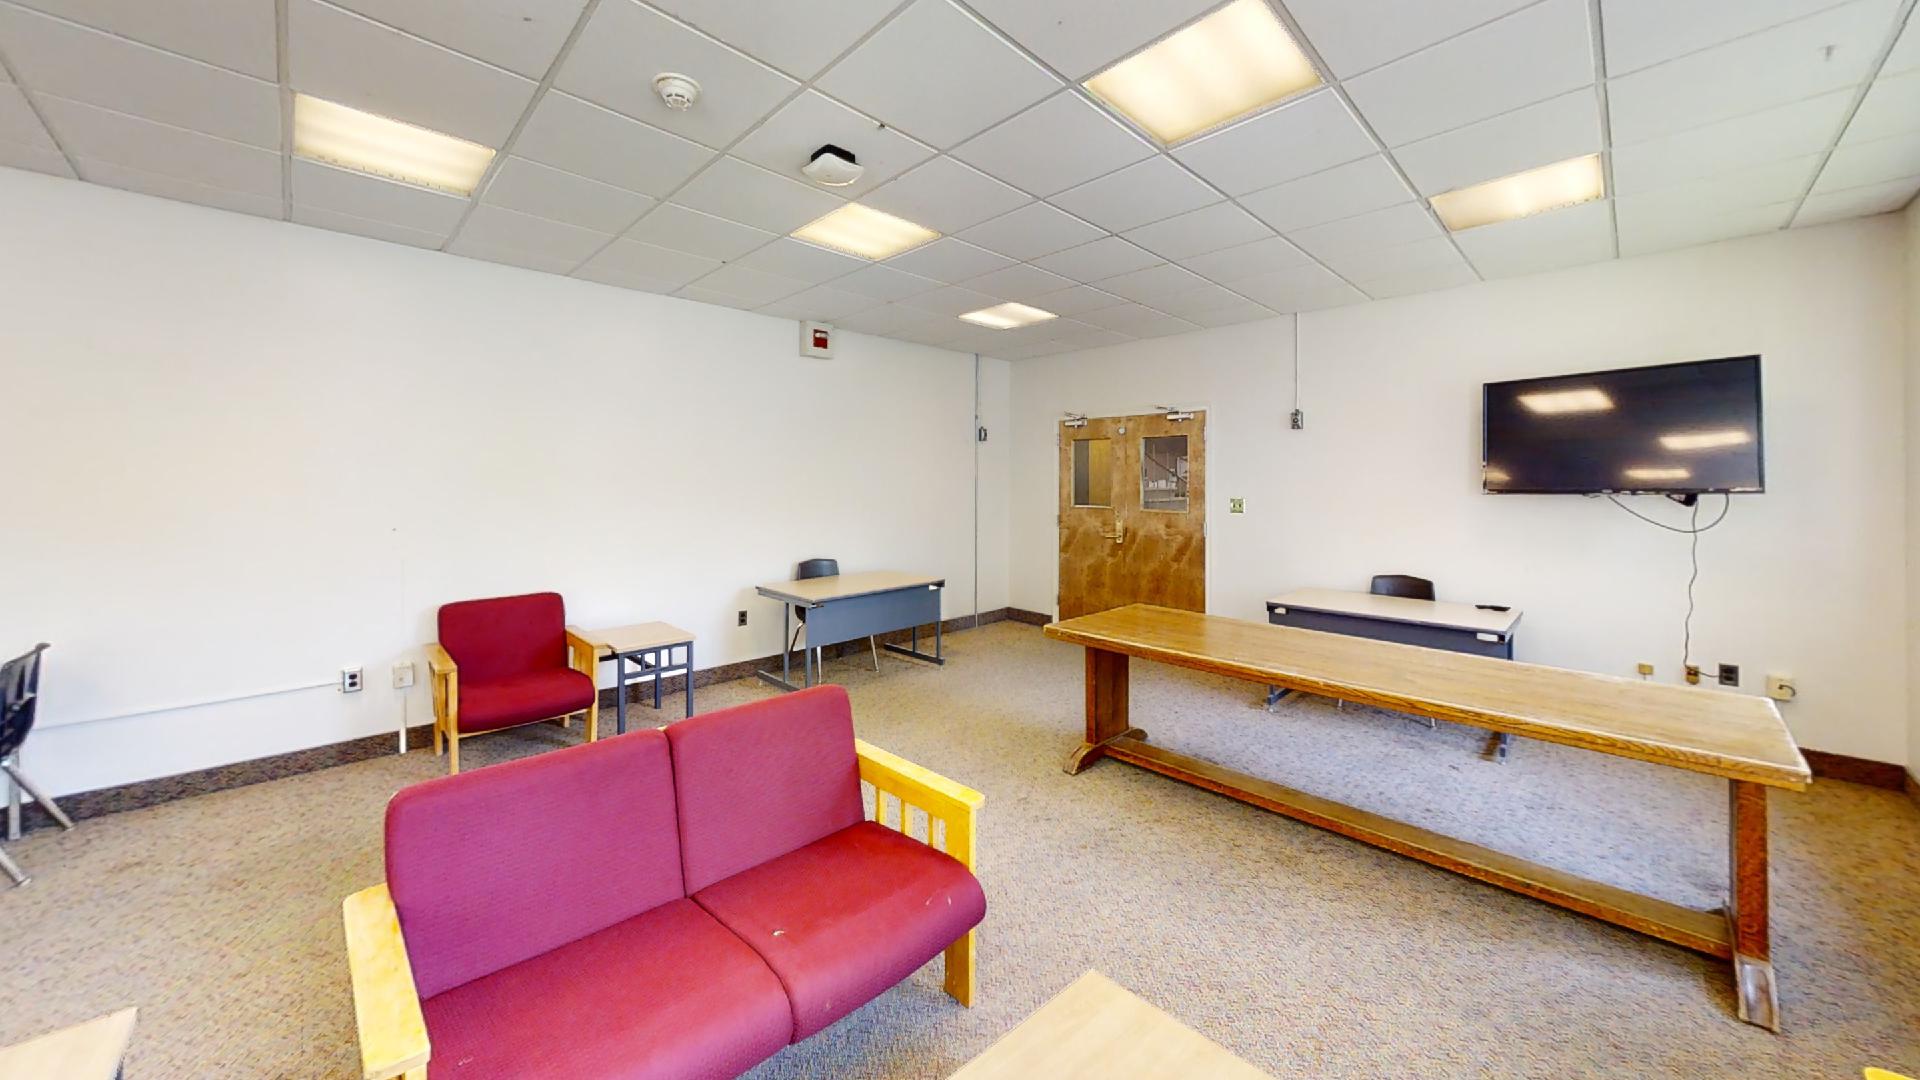 Chown Hall Common Room